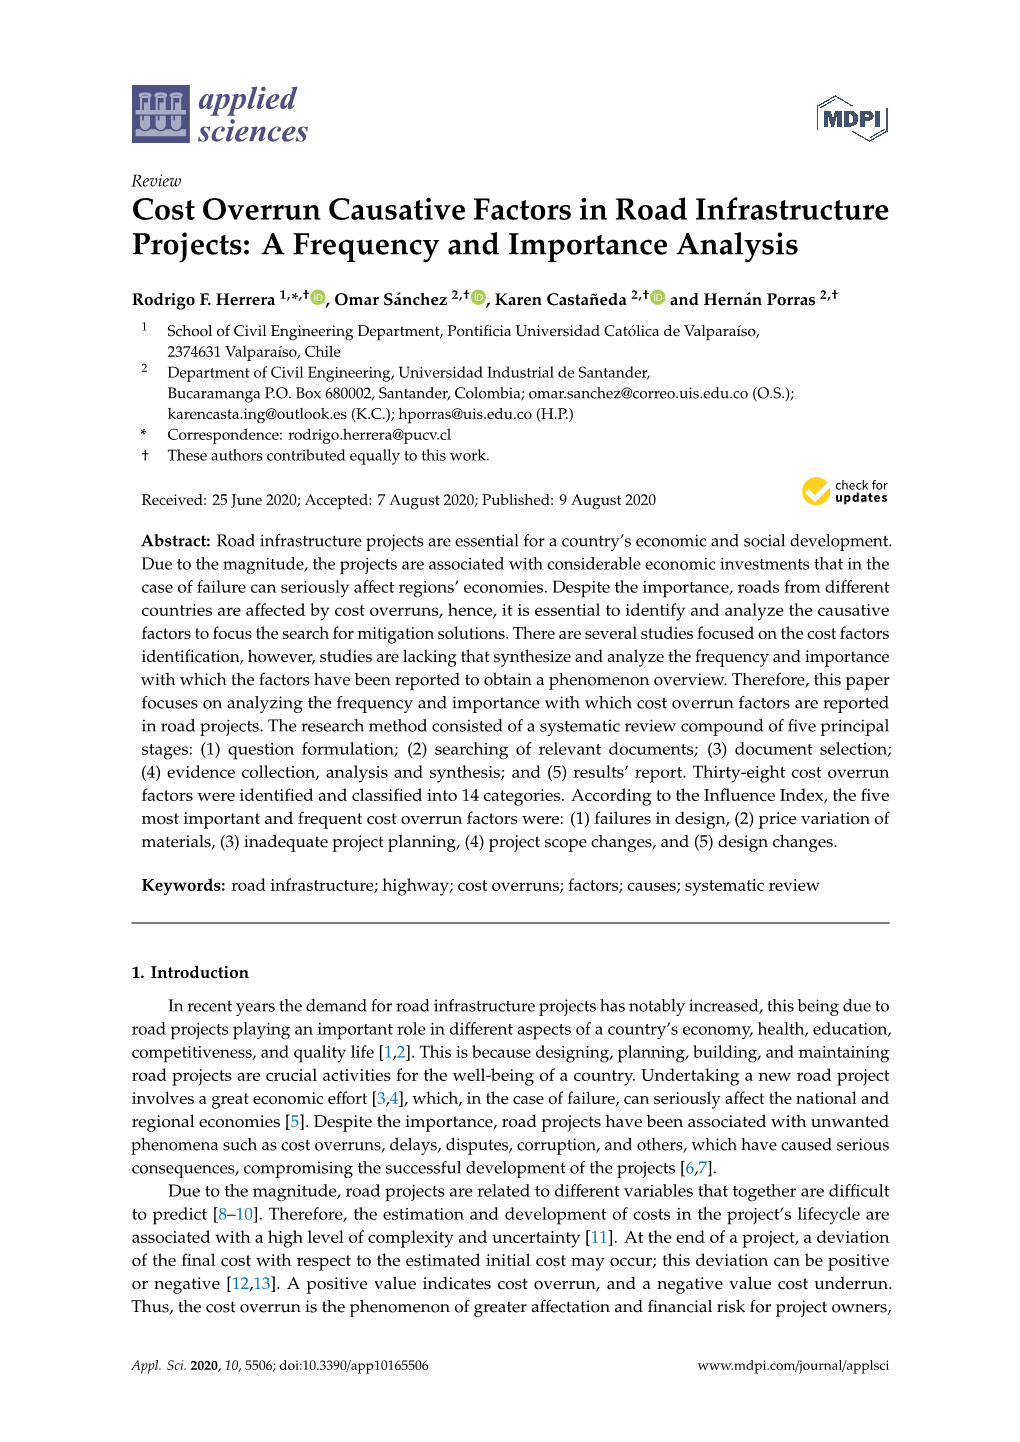 Cost Overrun Causative Factors in Road Infrastructure Projects: a Frequency and Importance Analysis